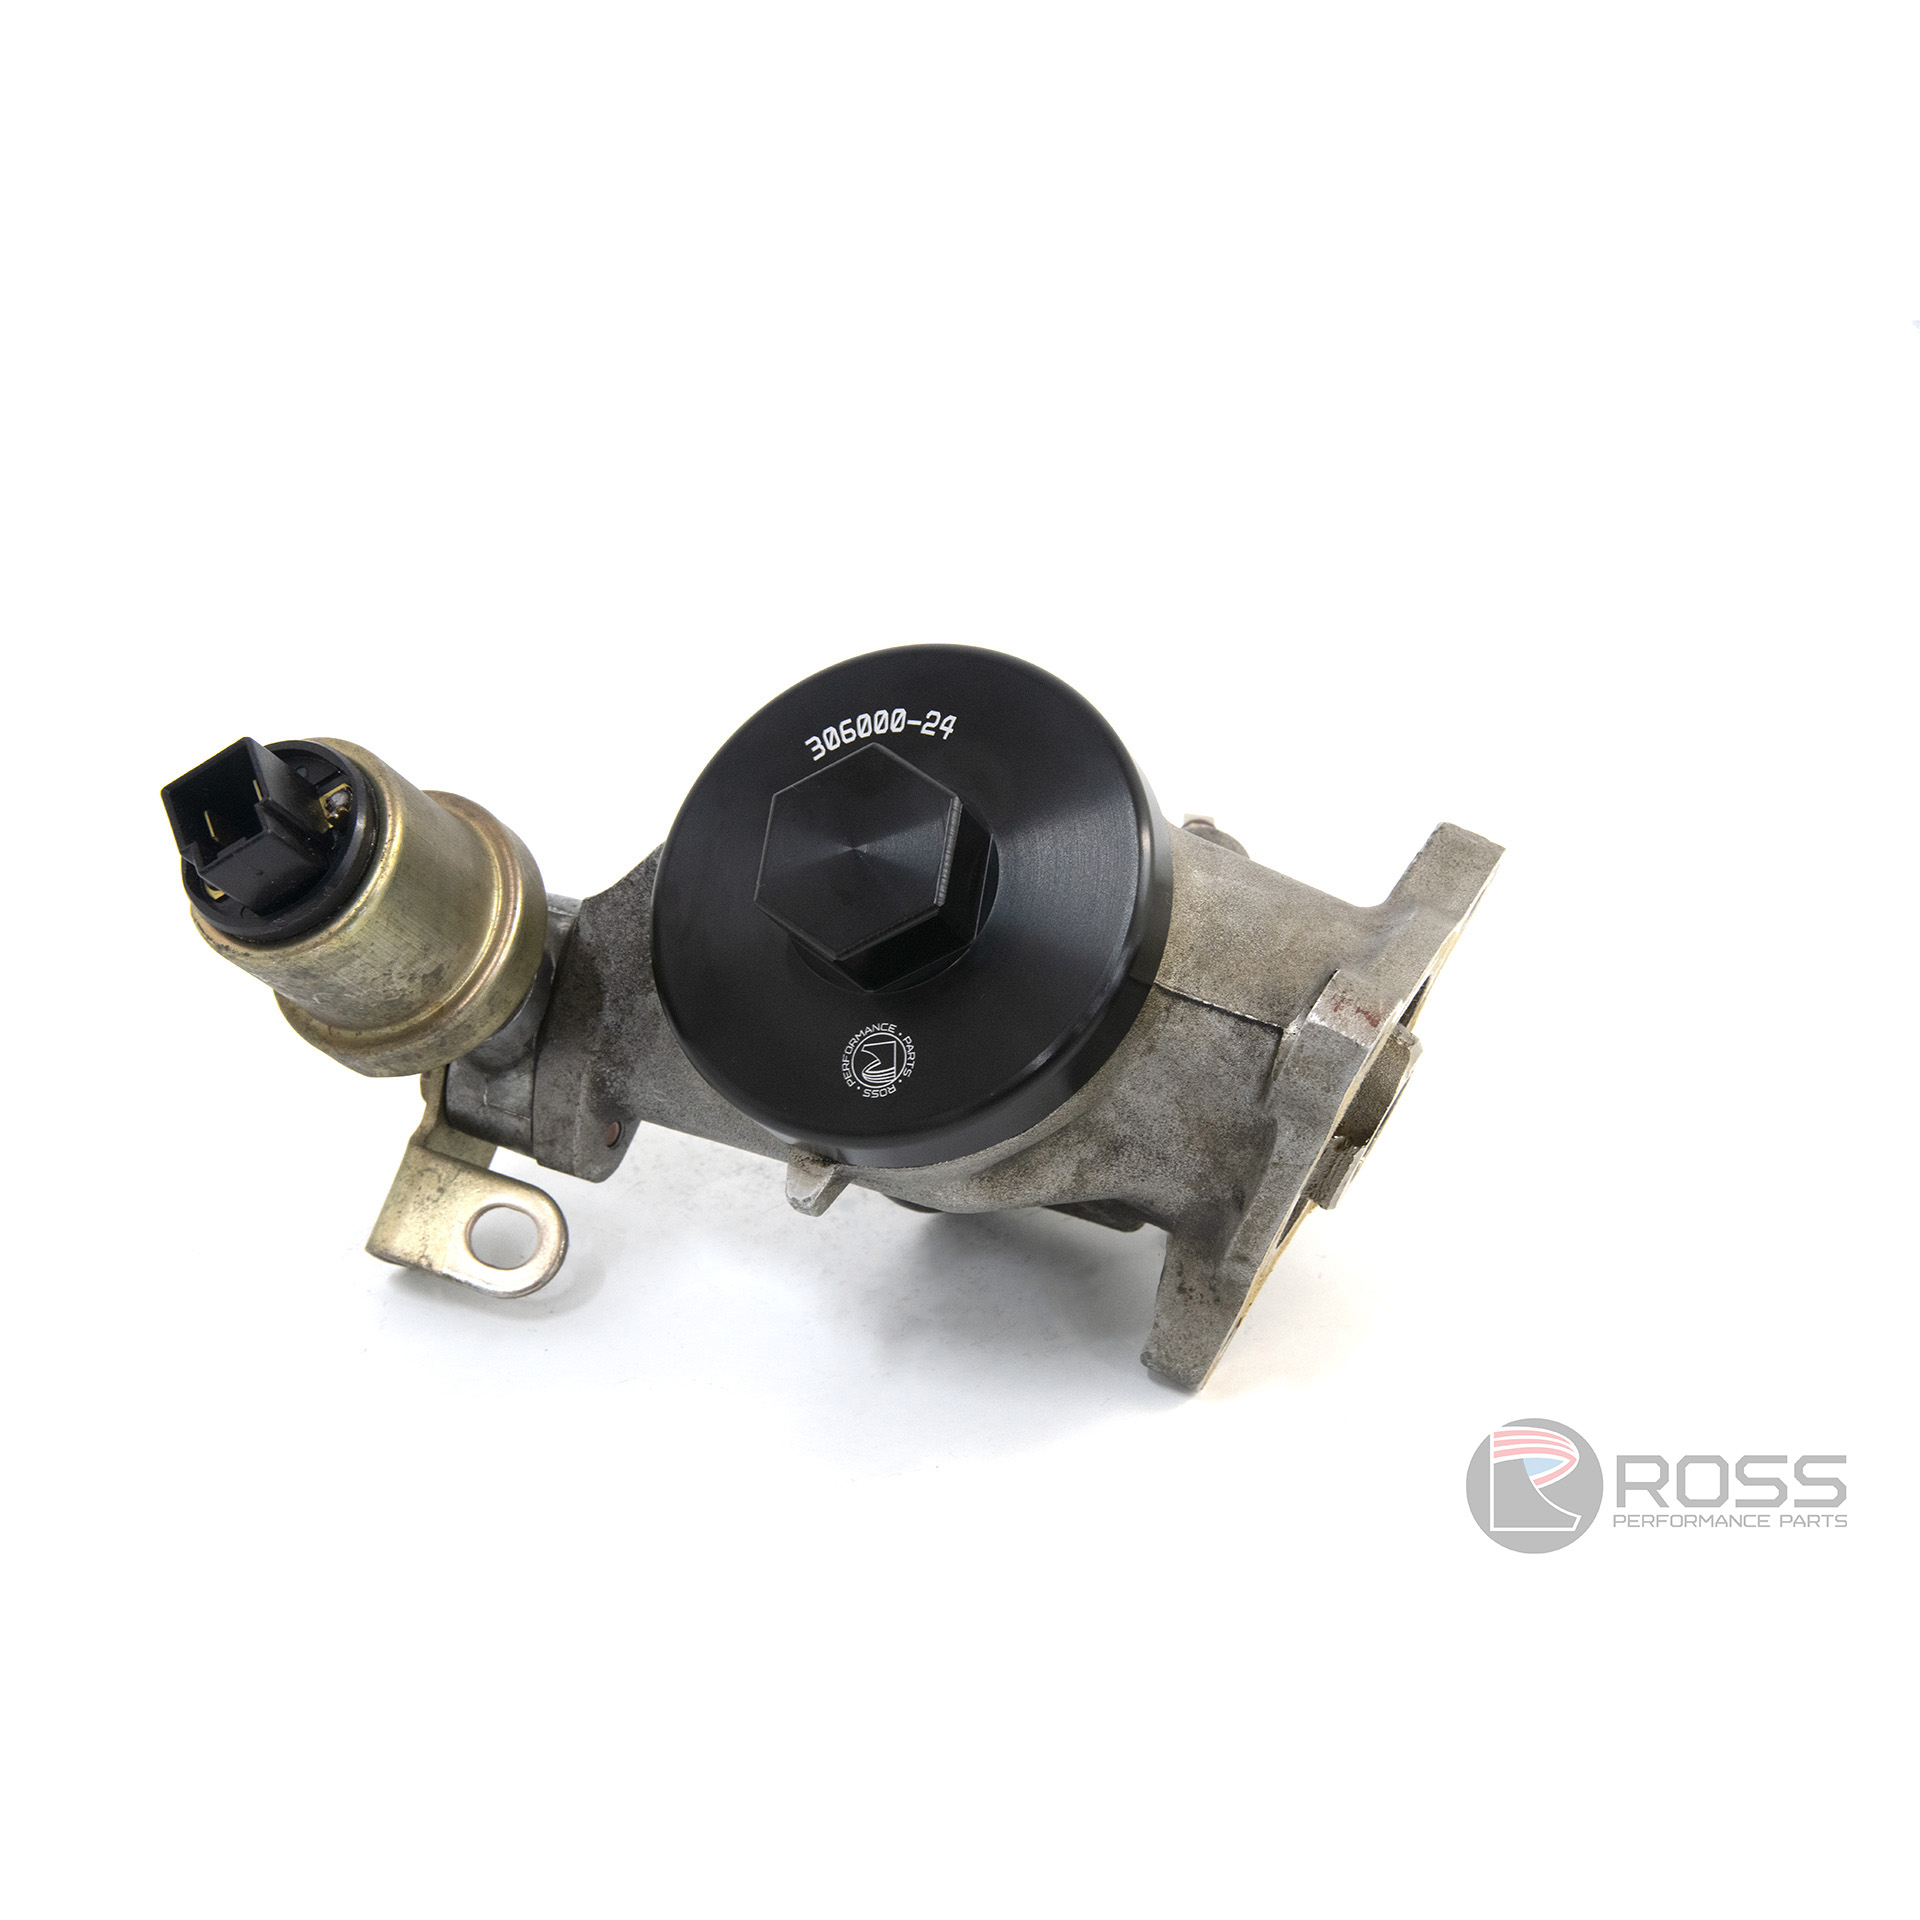 Ross Nissan RB Oil Cooler Block Off - Fitted